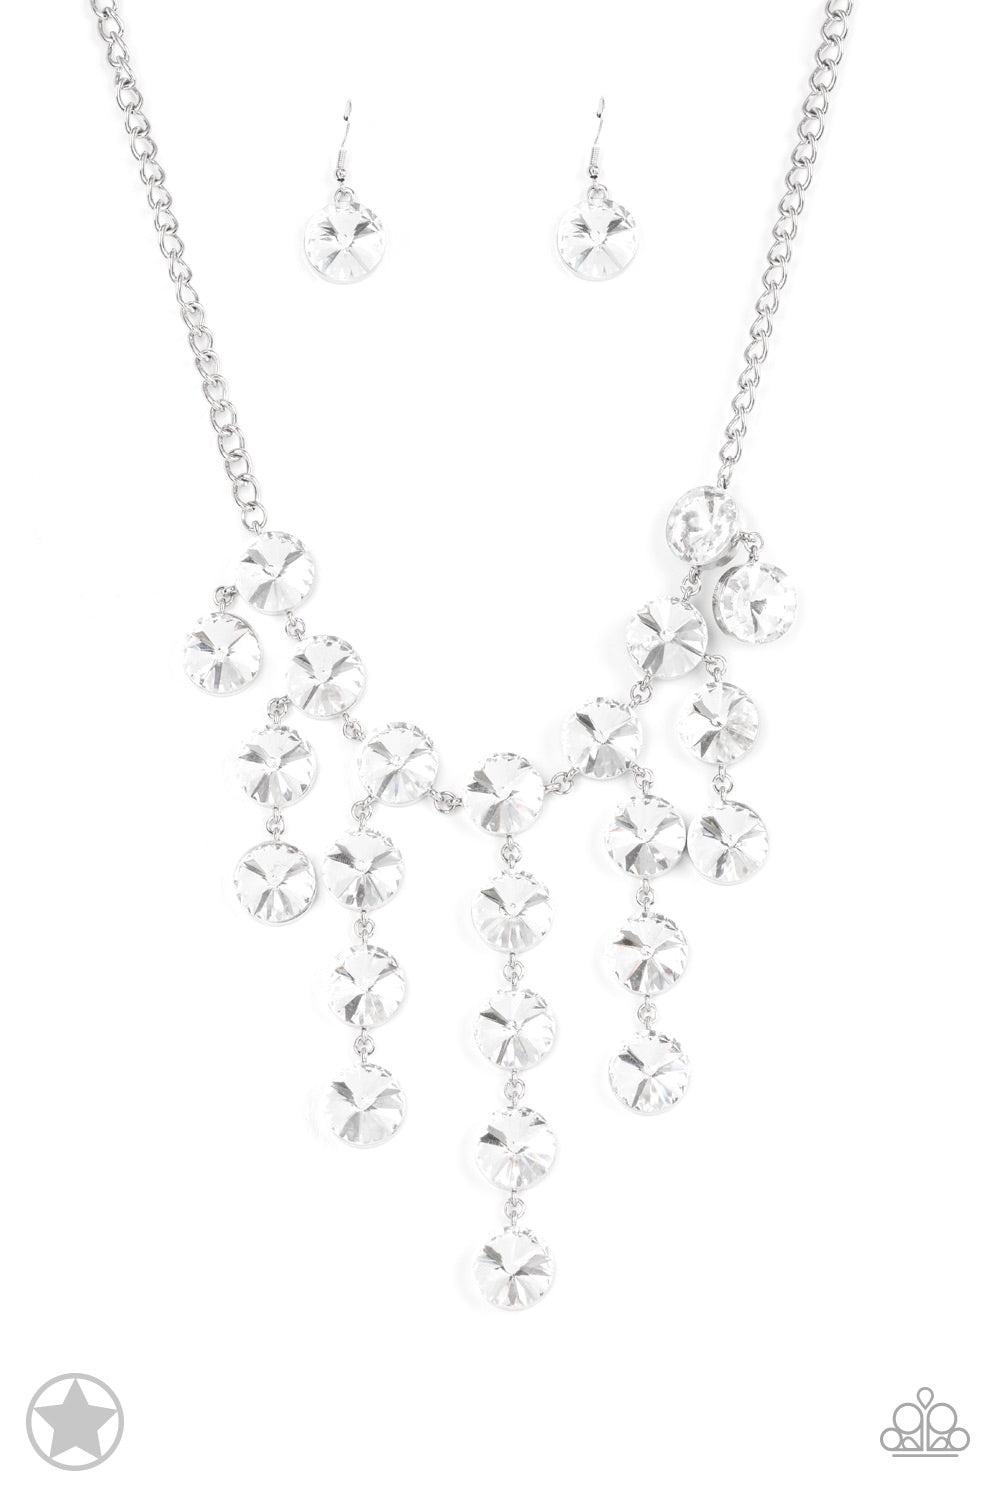 Spotlight Stunner White Paparazzi Necklaces Cashmere Pink Jewels